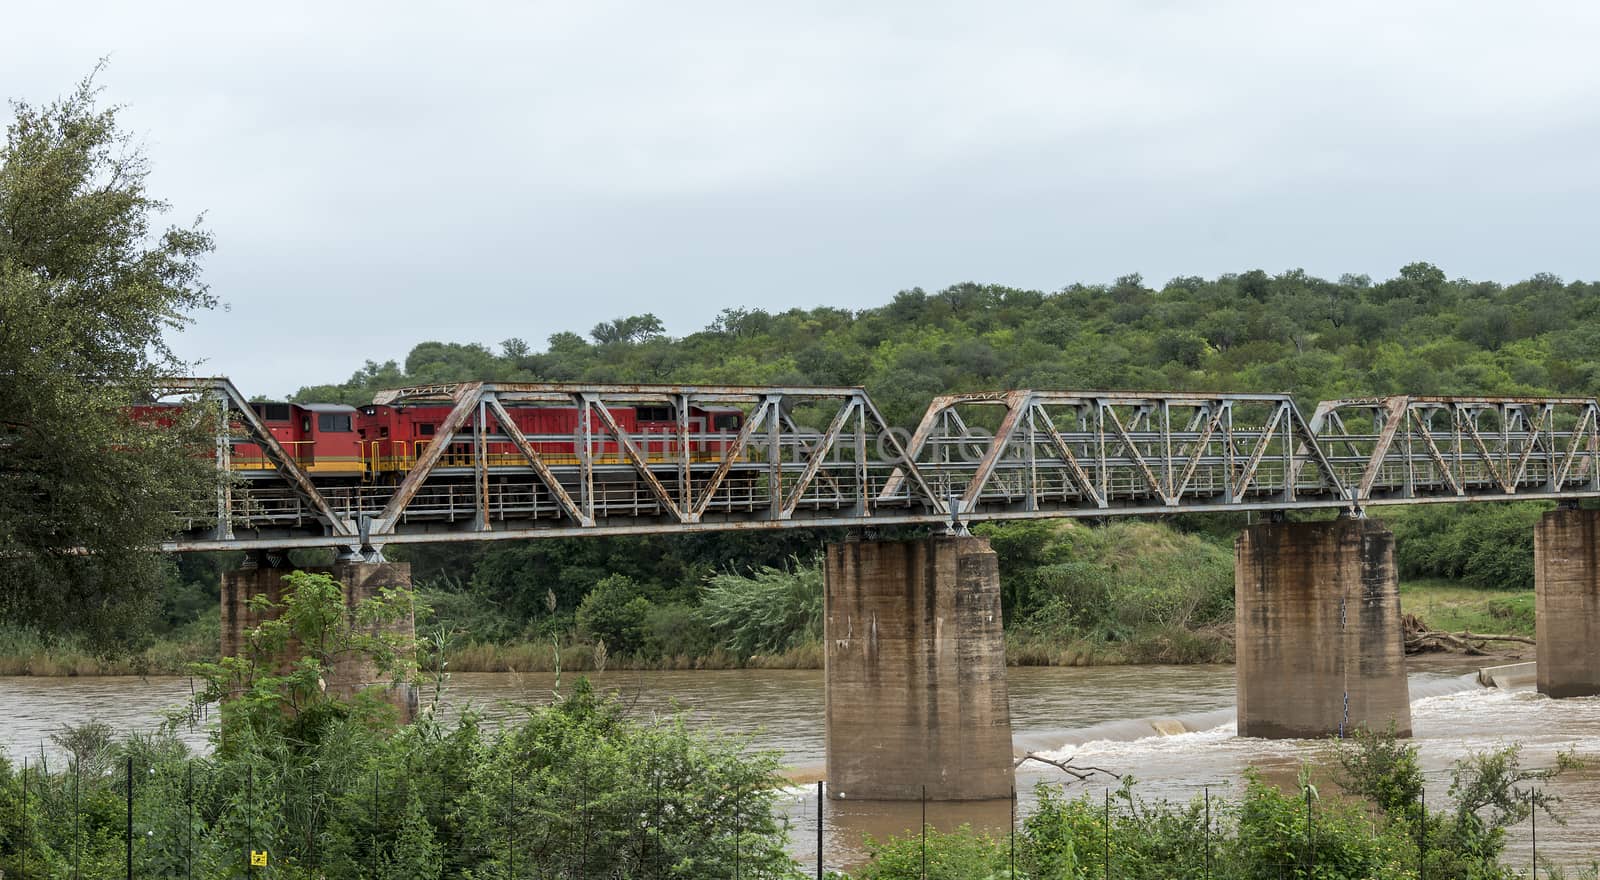 train crossing bridge over elephant riverin south africa  by compuinfoto